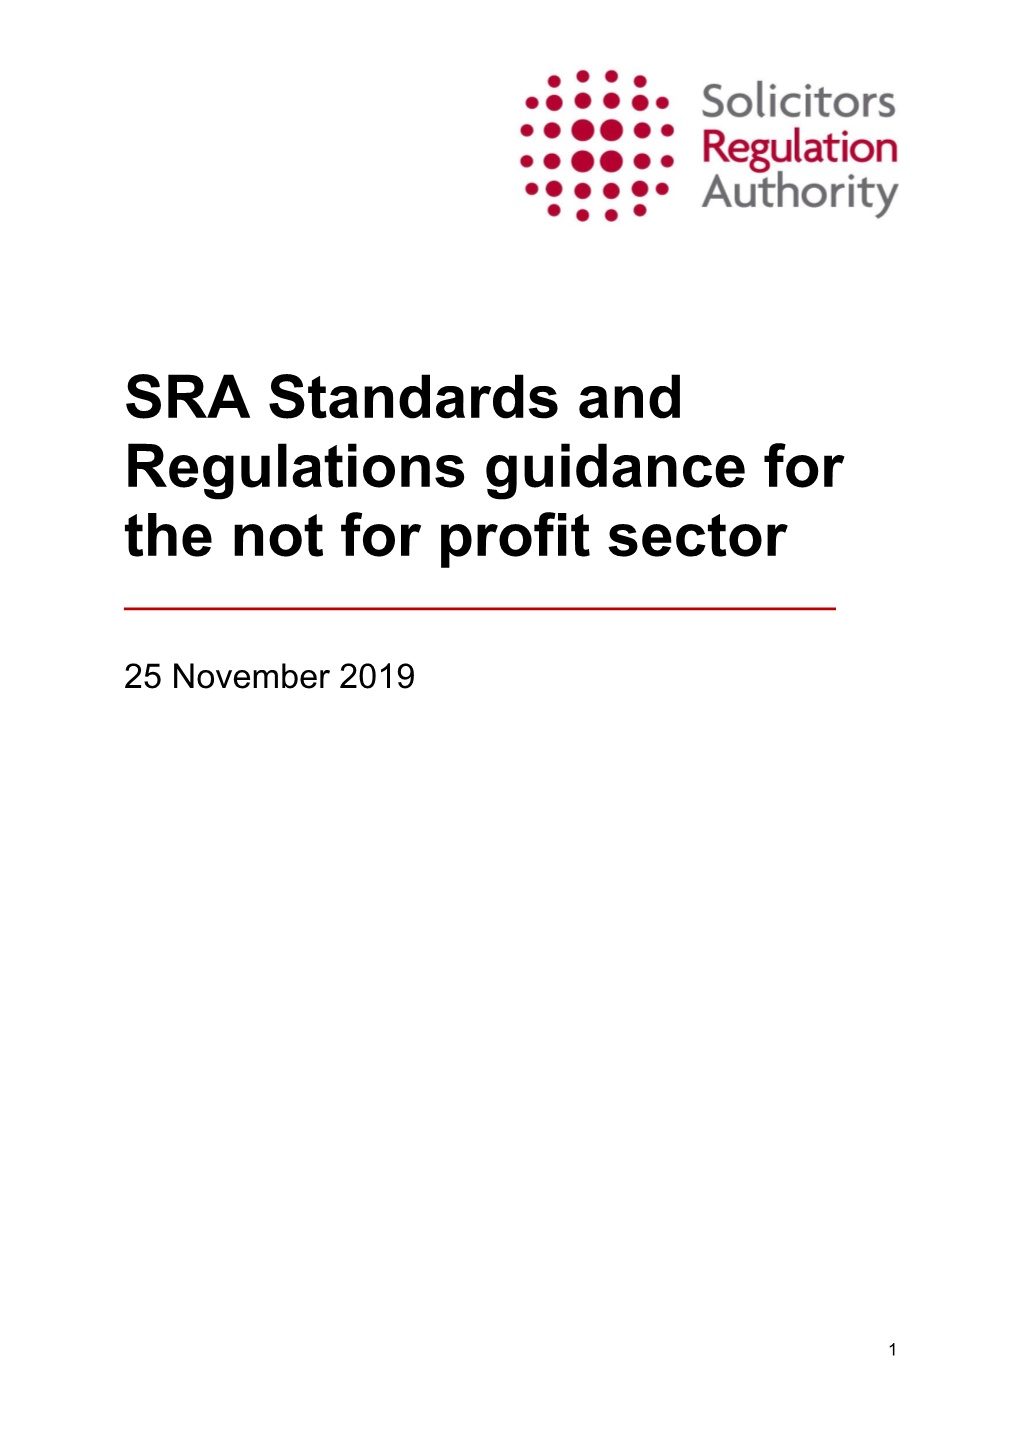 SRA Standards and Regulations Guidance for the Not for Profit Sector